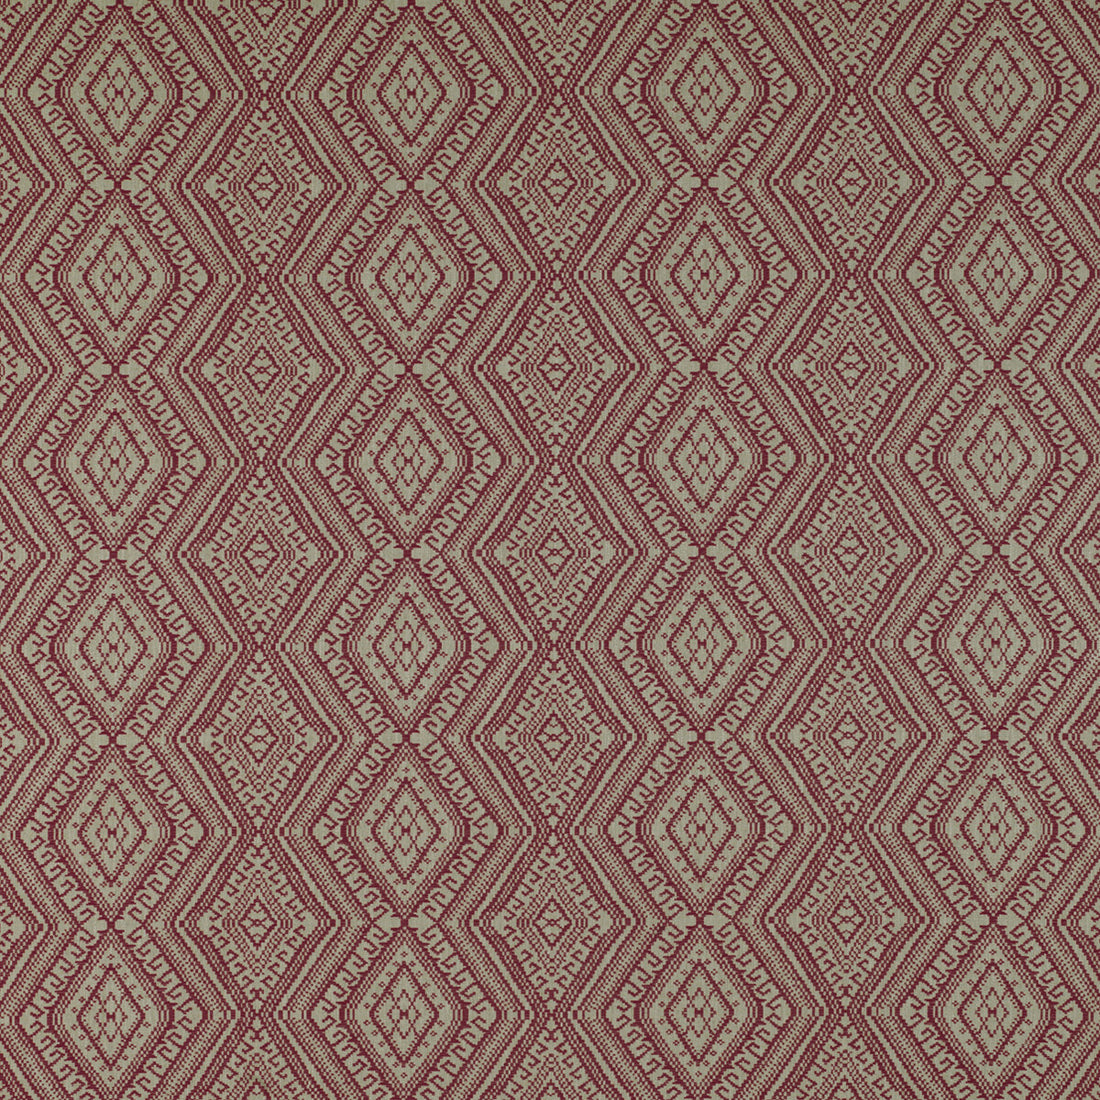 Milan fabric in rojo color - pattern GDT5326.004.0 - by Gaston y Daniela in the Tierras collection